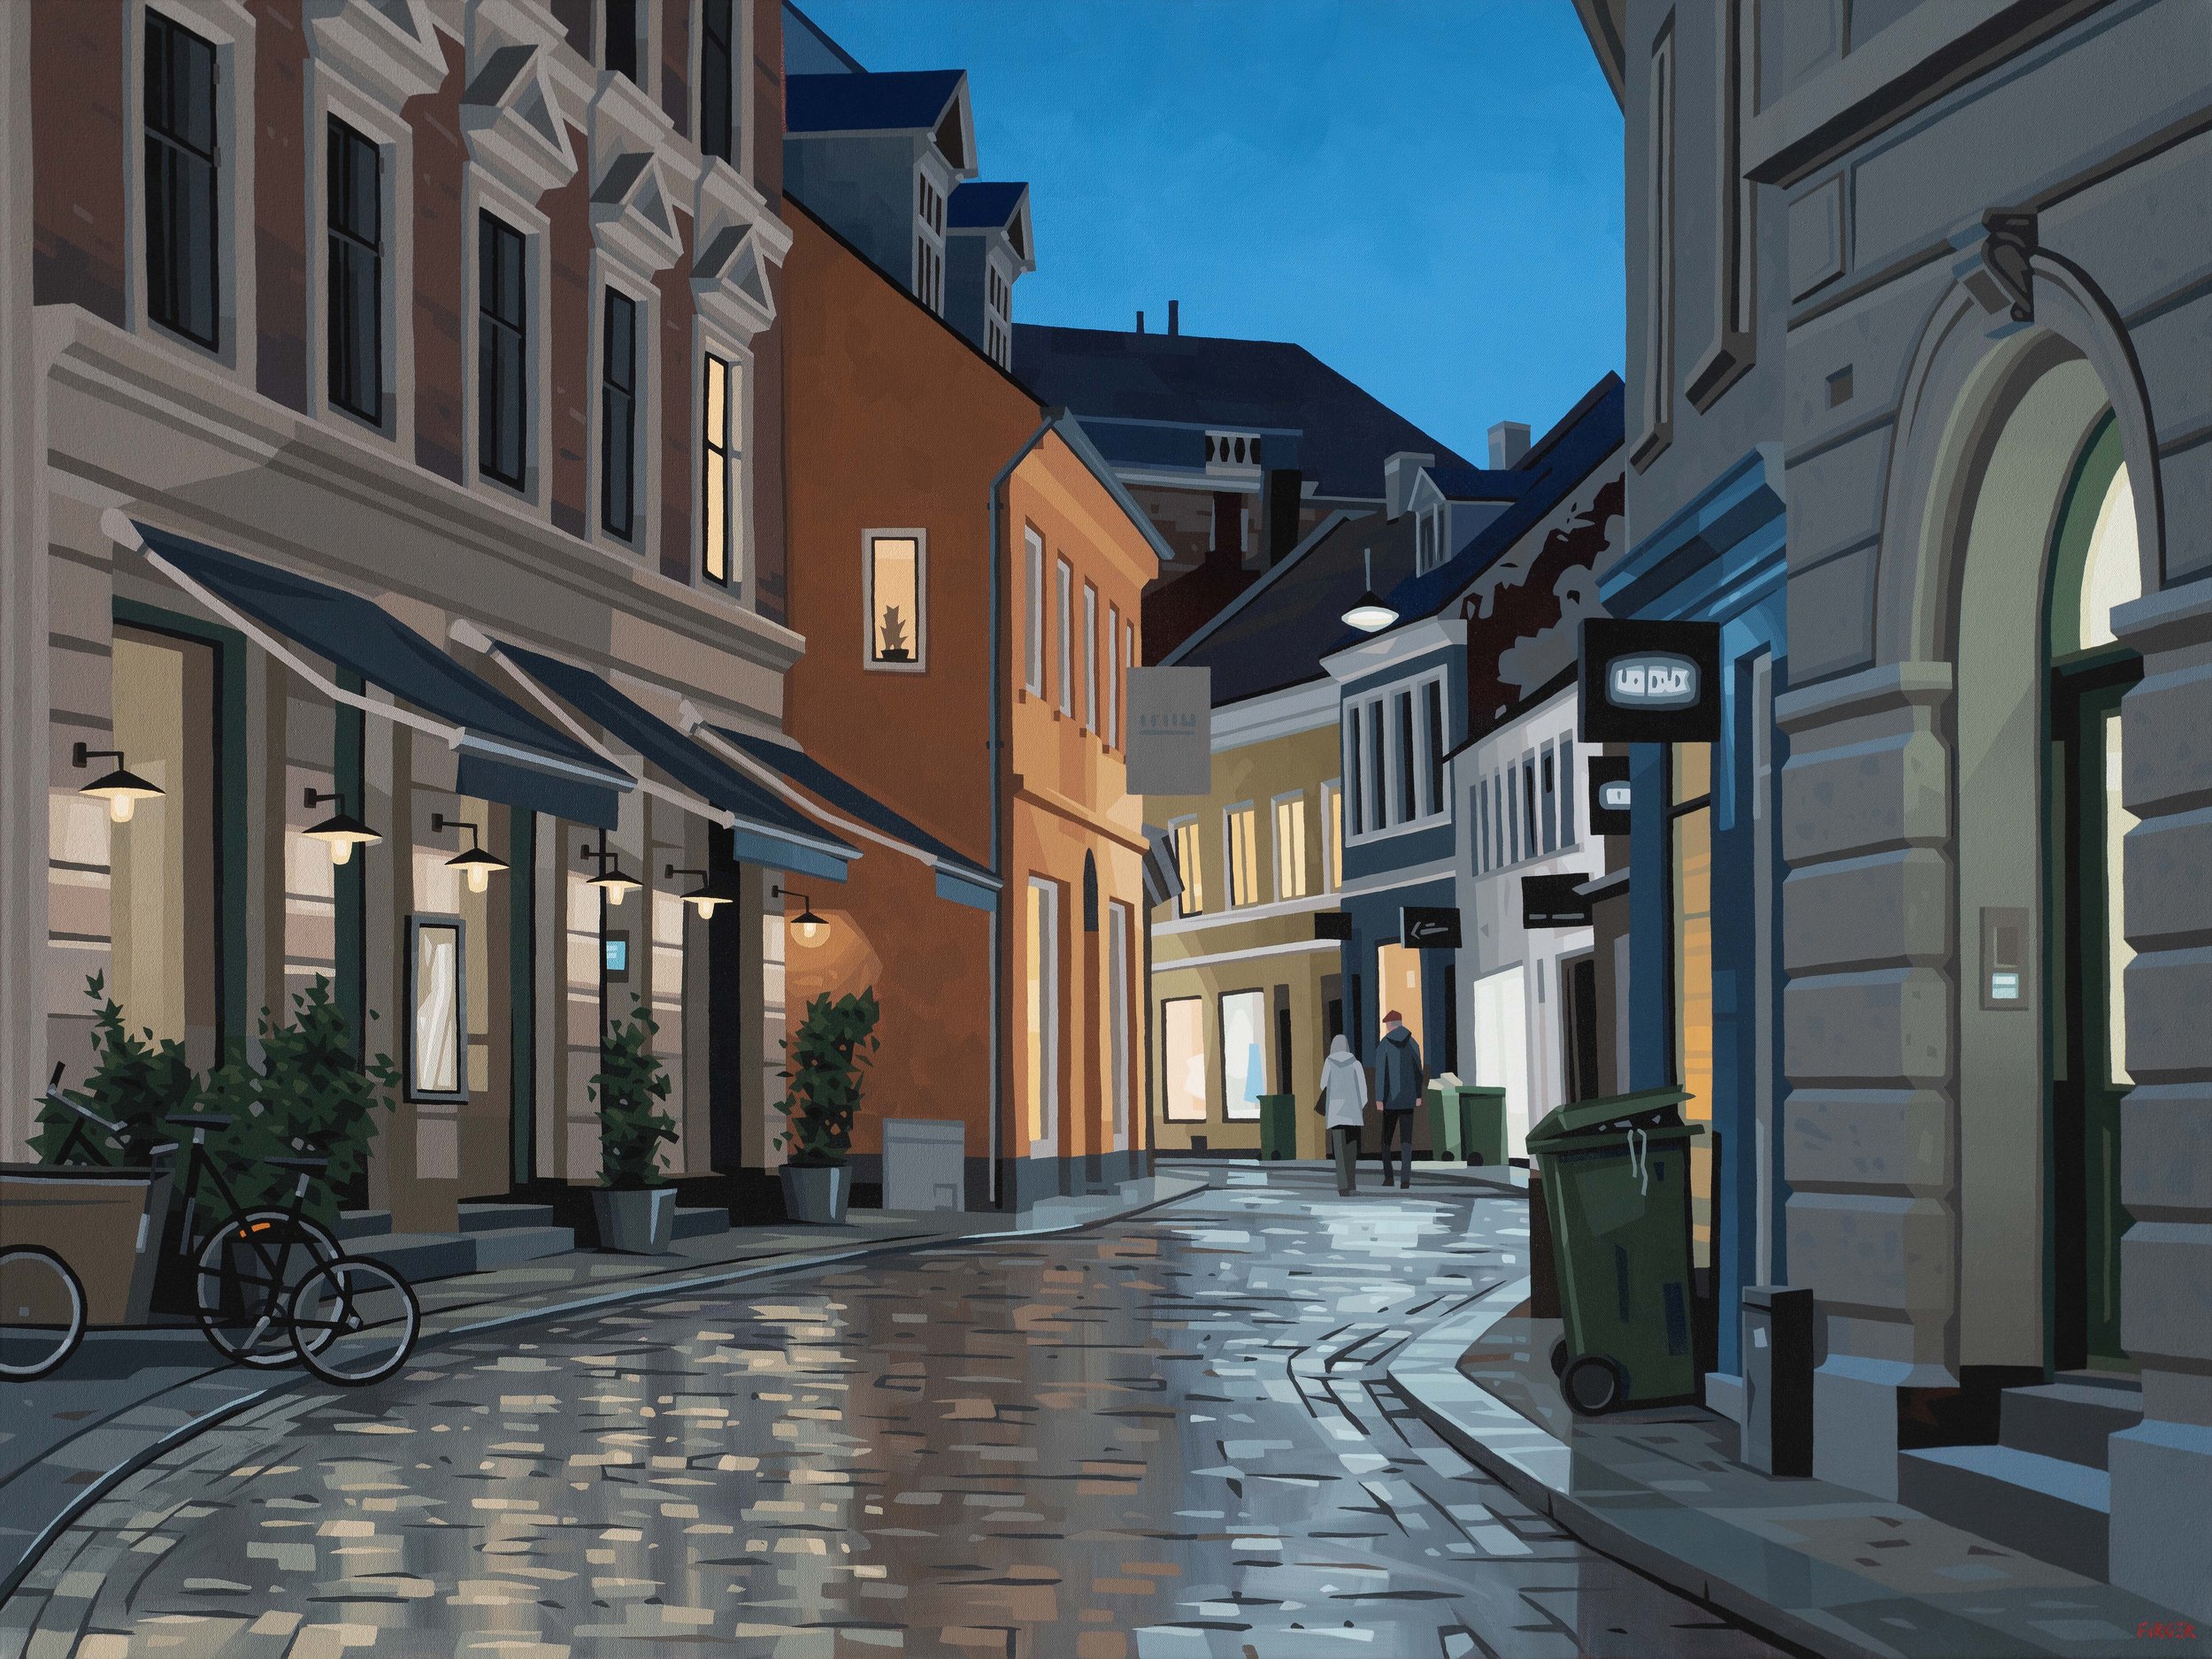 Cafes and Cobblestones - 36 x 48, Acrylic on Canvas